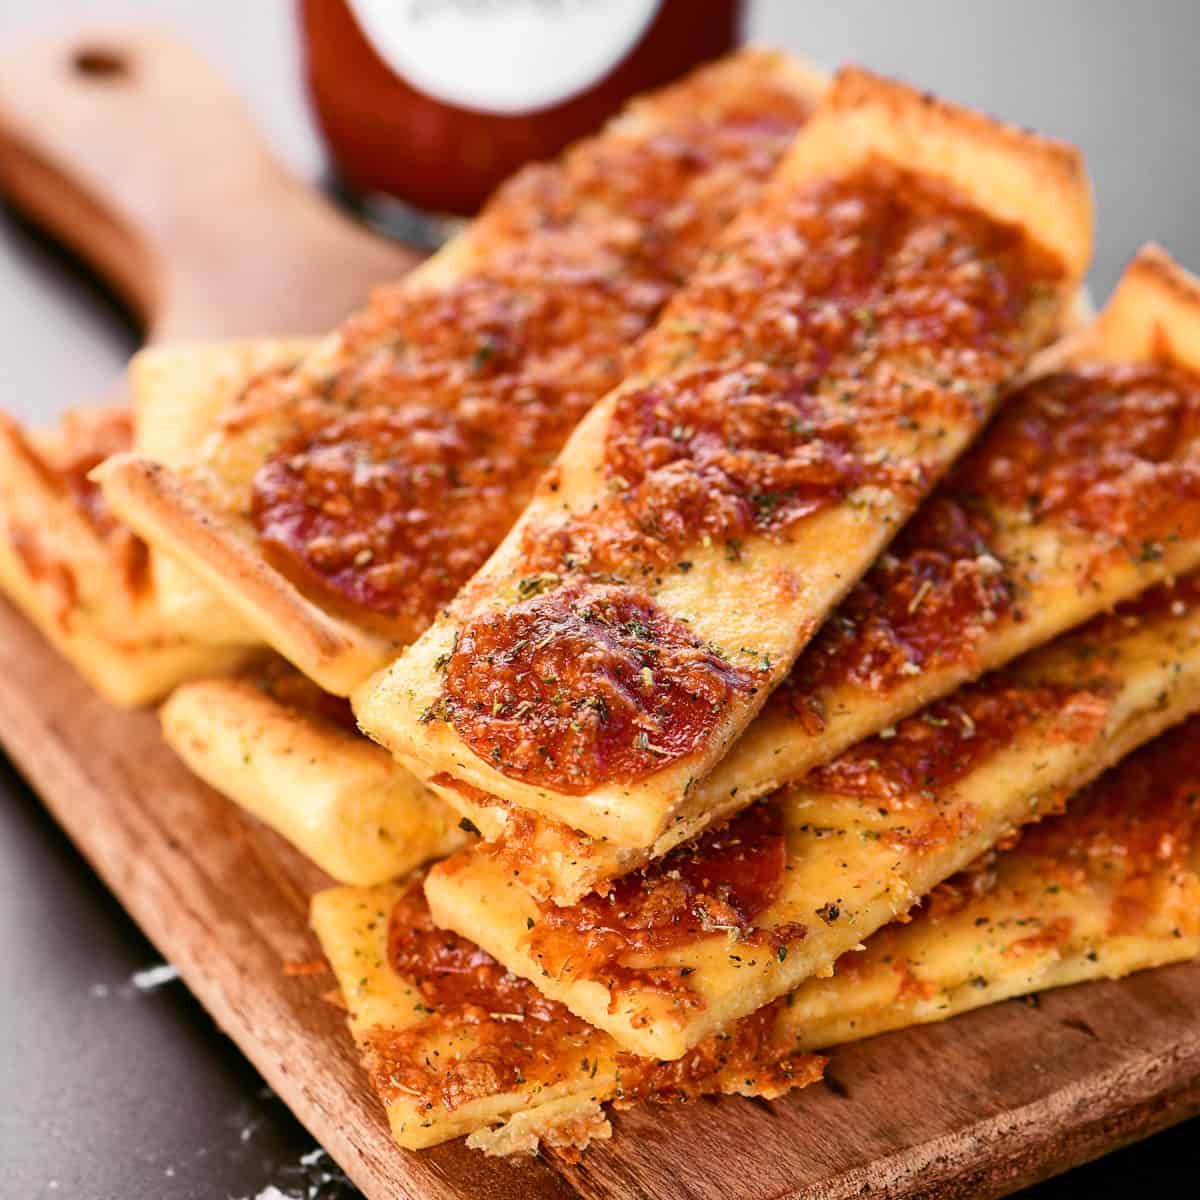 A pile of pizza sticks on a cutting board.